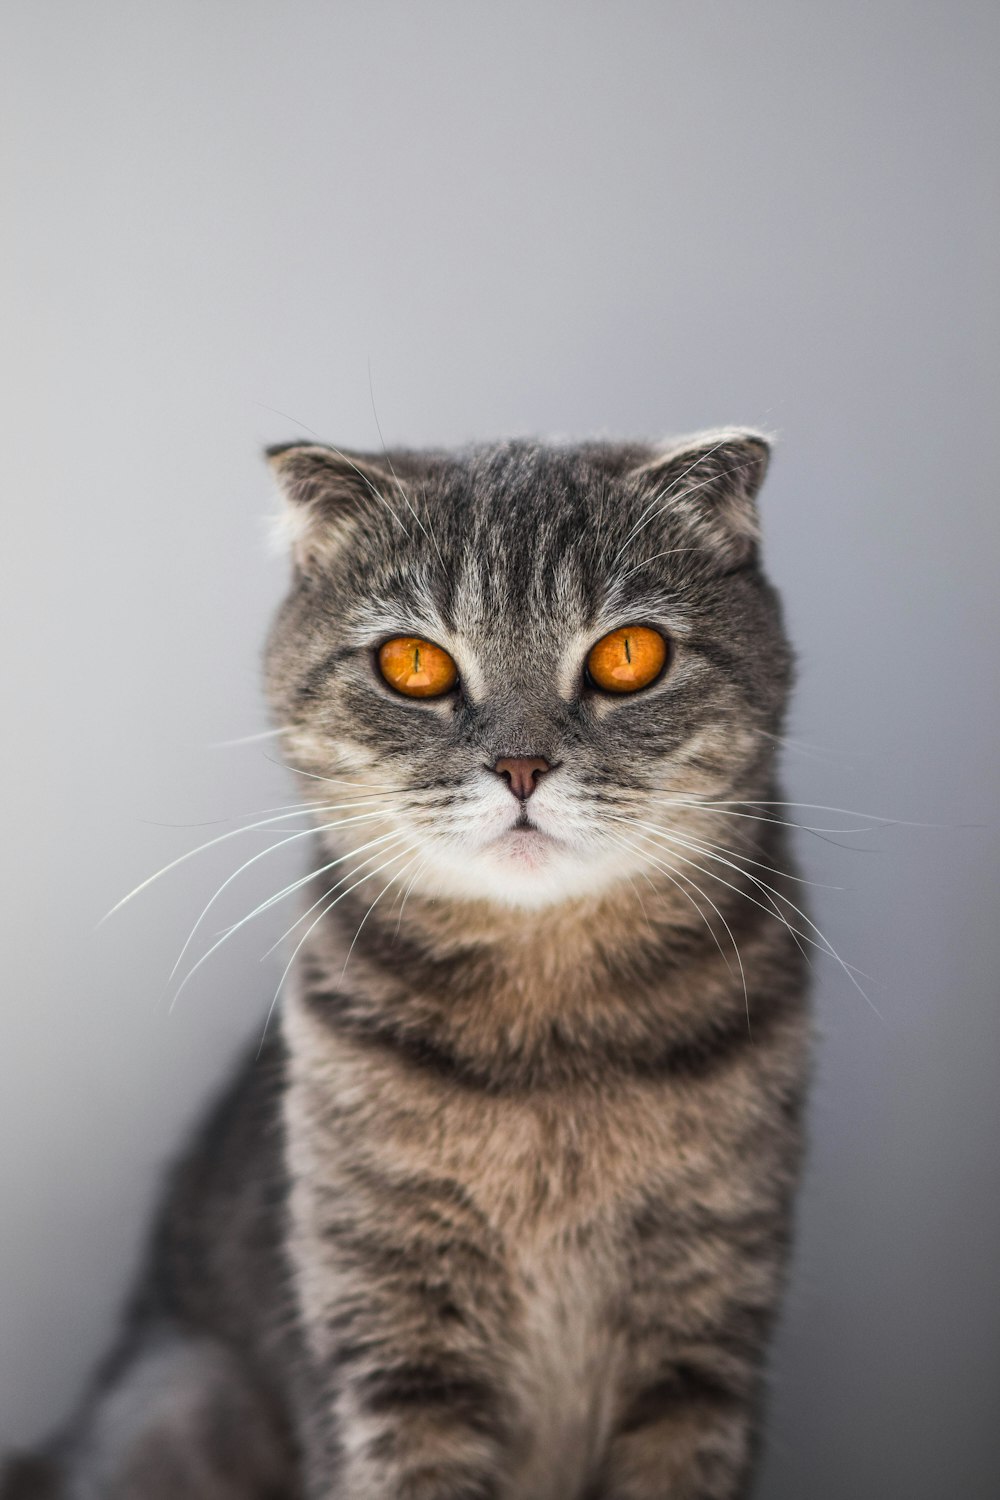 a cat with orange eyes sitting on a table